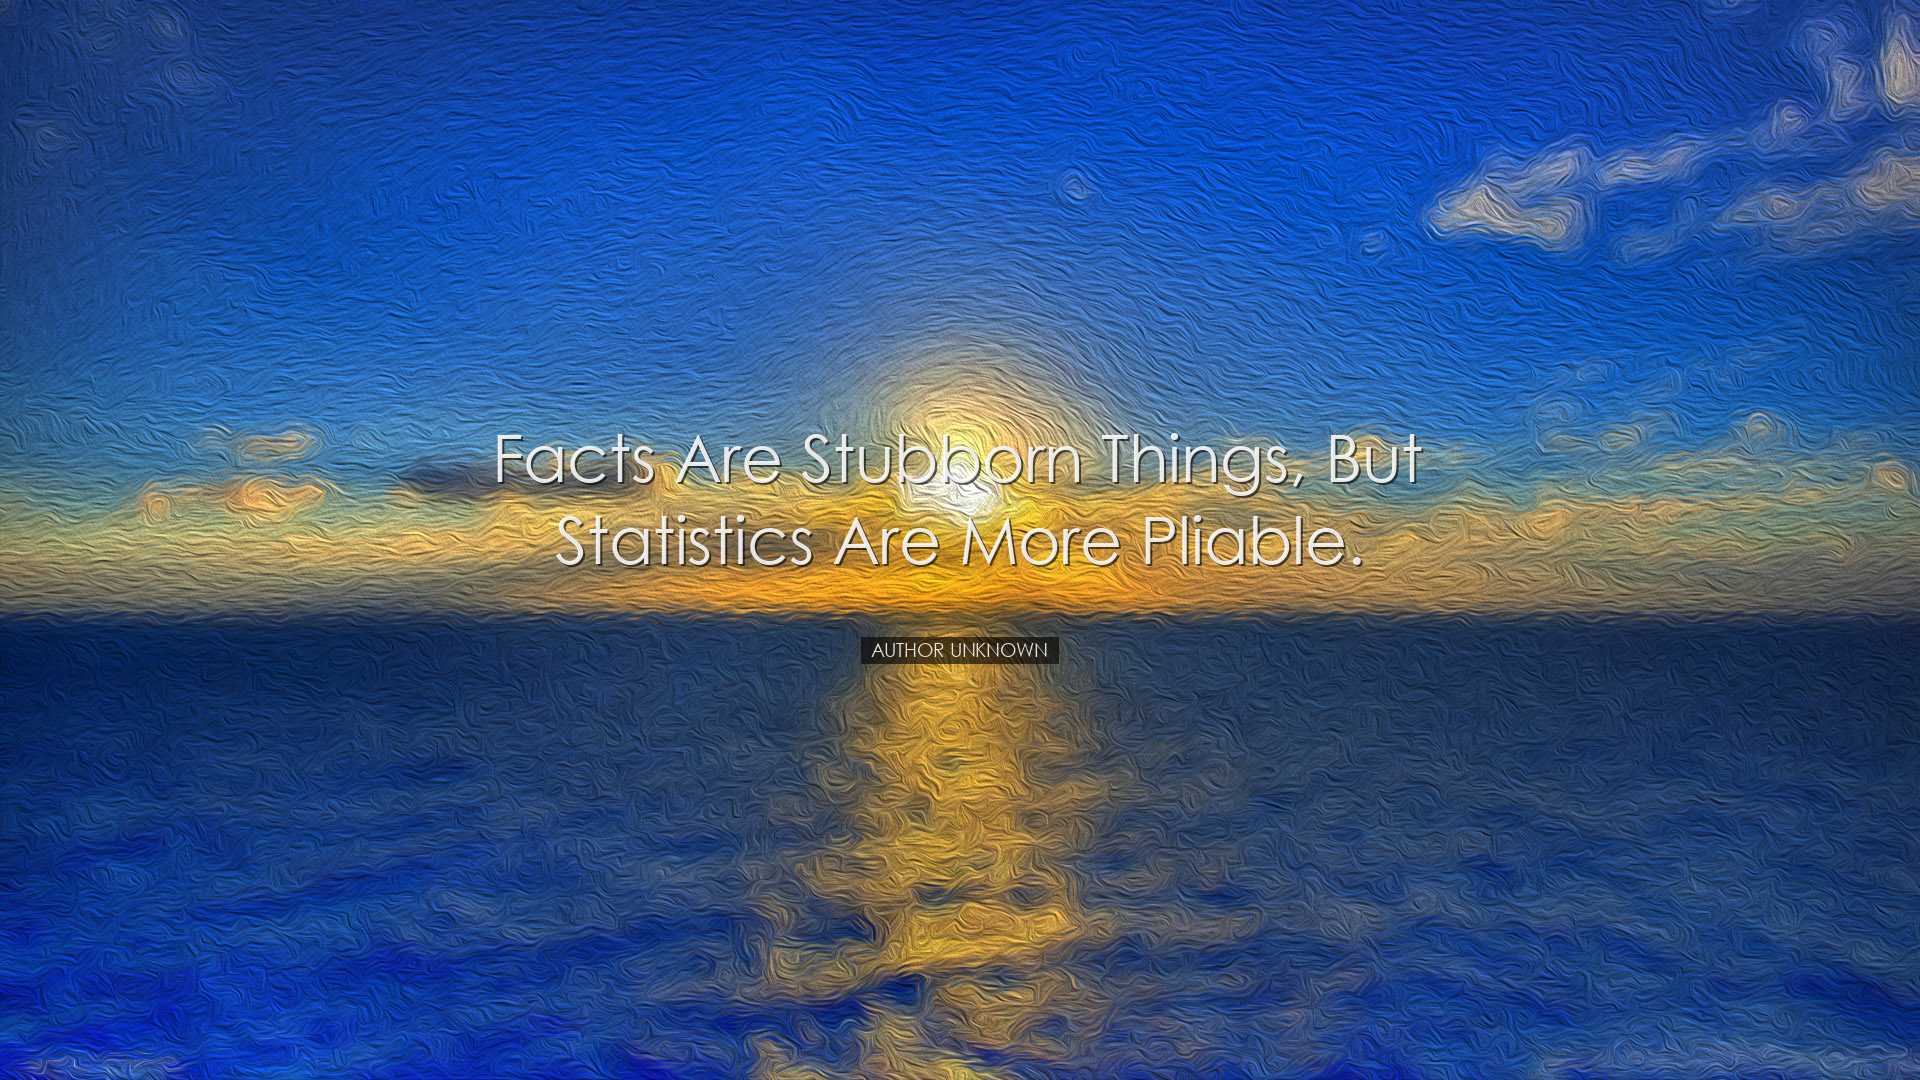 Facts are stubborn things, but statistics are more pliable. - Auth